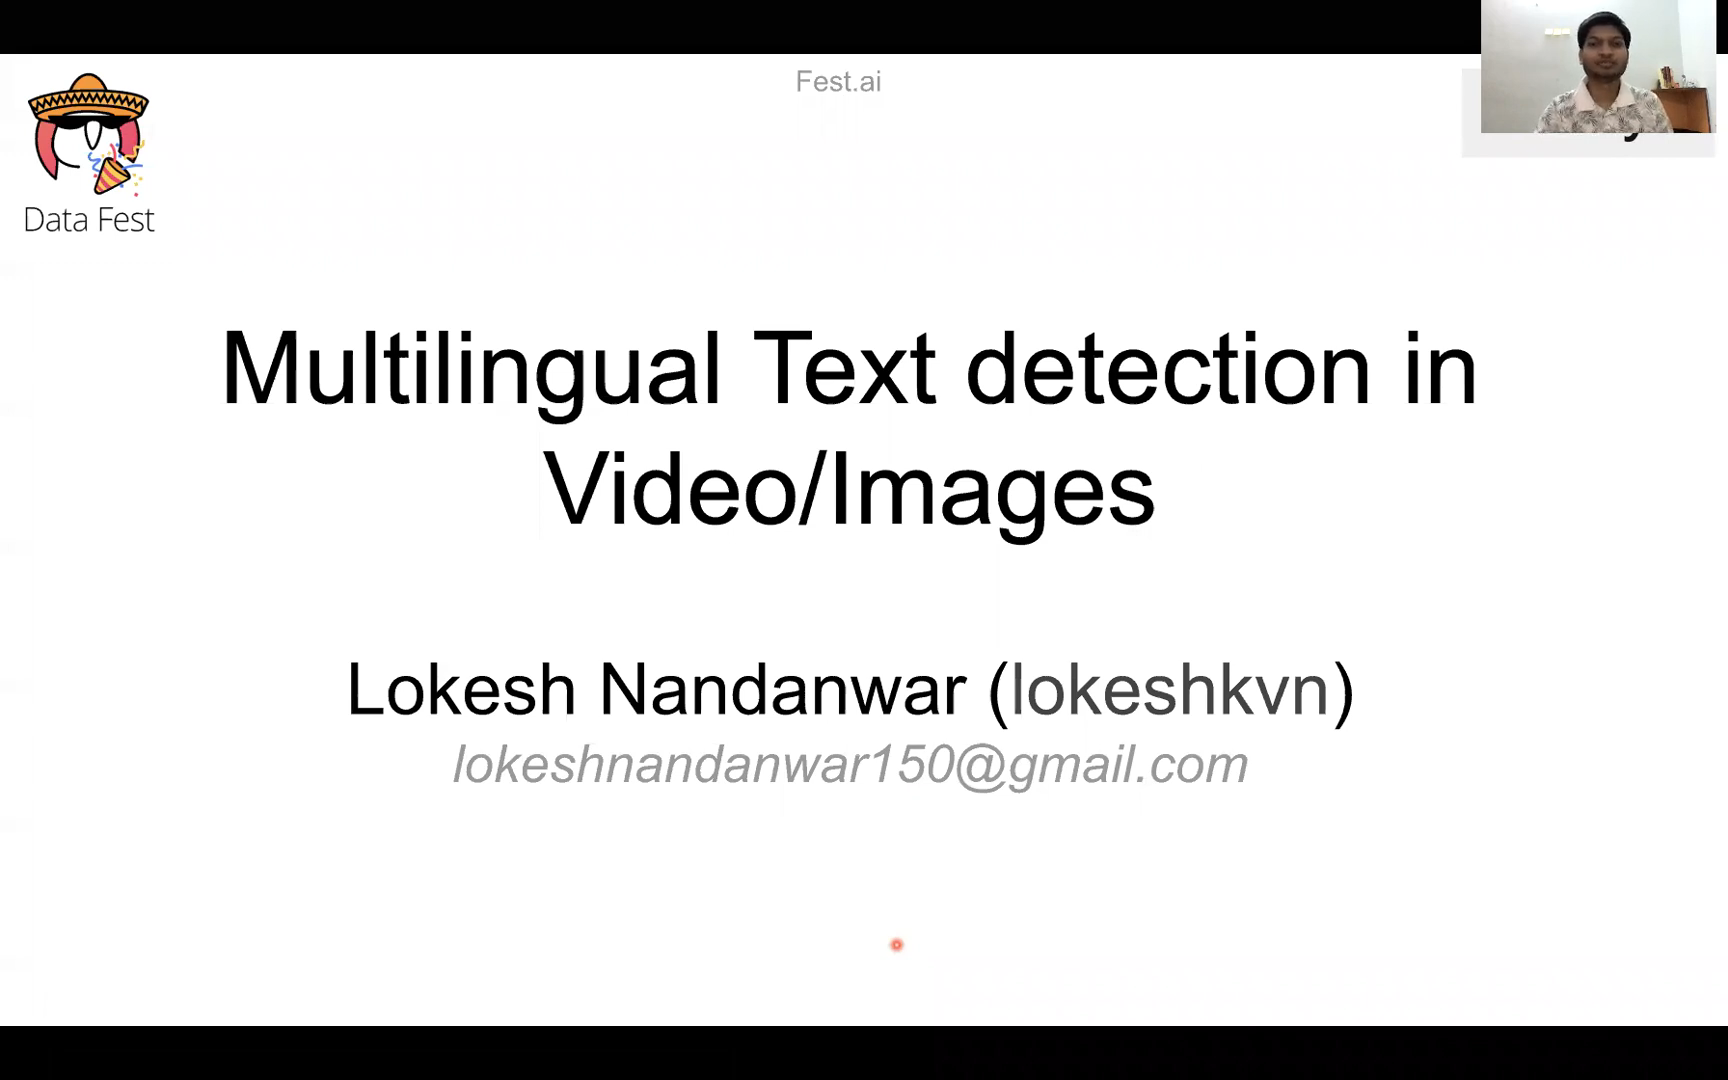 Multilingual Text detection in Video/Images